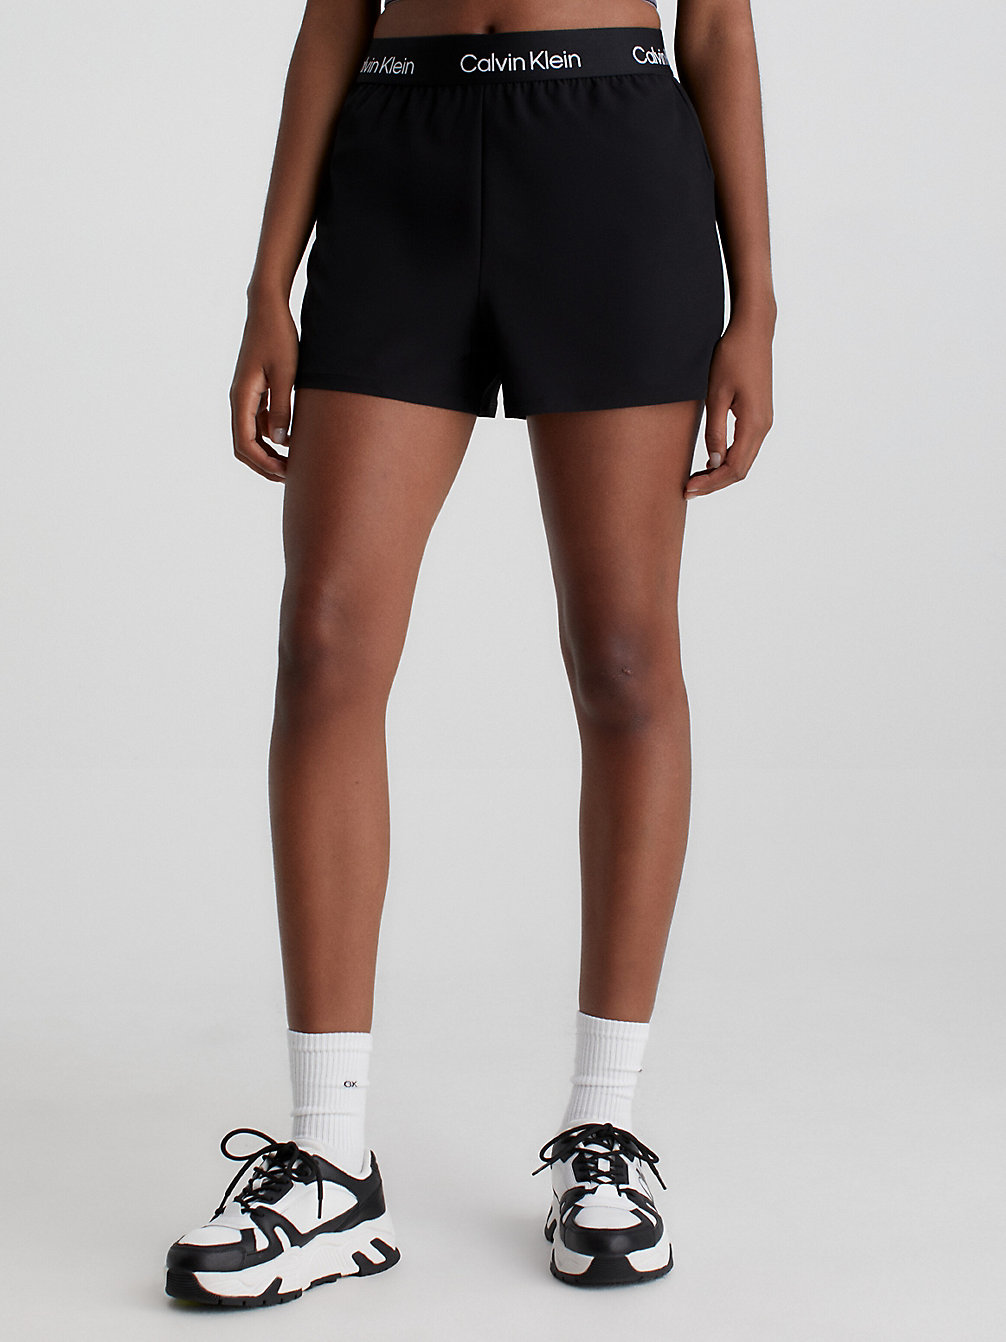 Shorts Deportivos > BLACK BEAUTY > undefined mujer > Calvin Klein